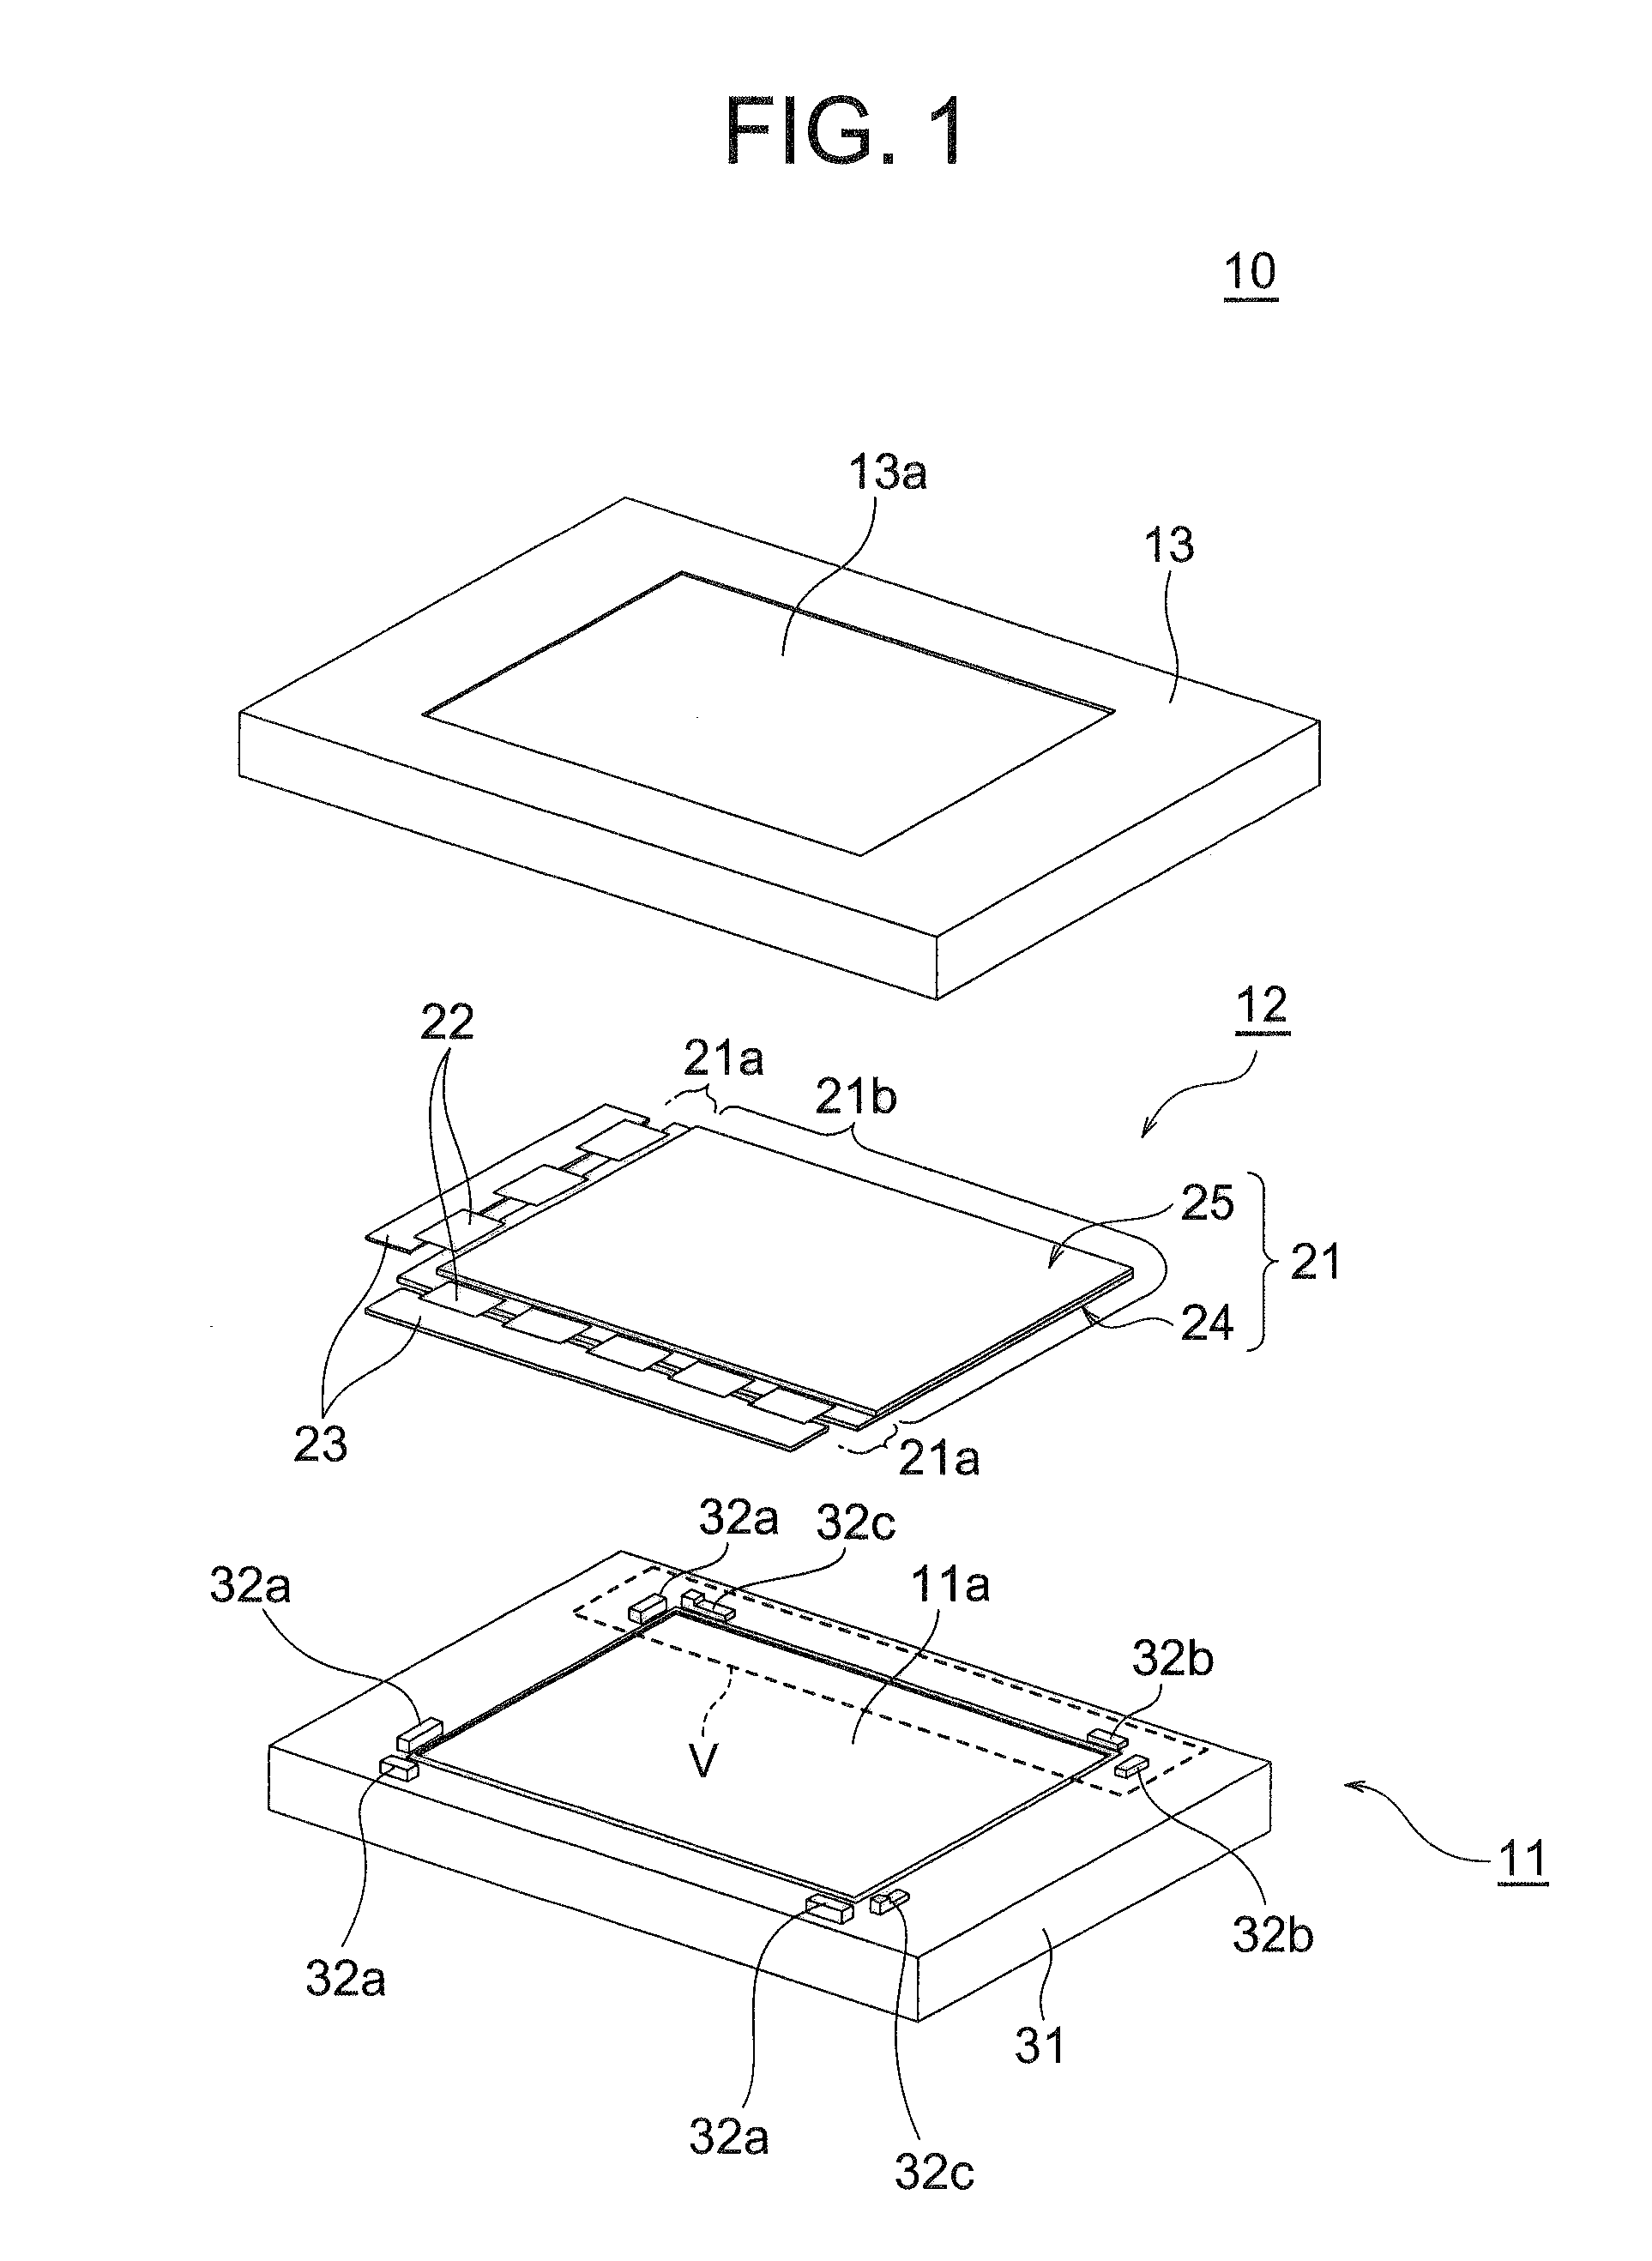 Display device comprising a first positioning wall having a height larger than the height of the bonding surface of the substrates and a second positioning wall having a height smaller than the height of the bonding surface